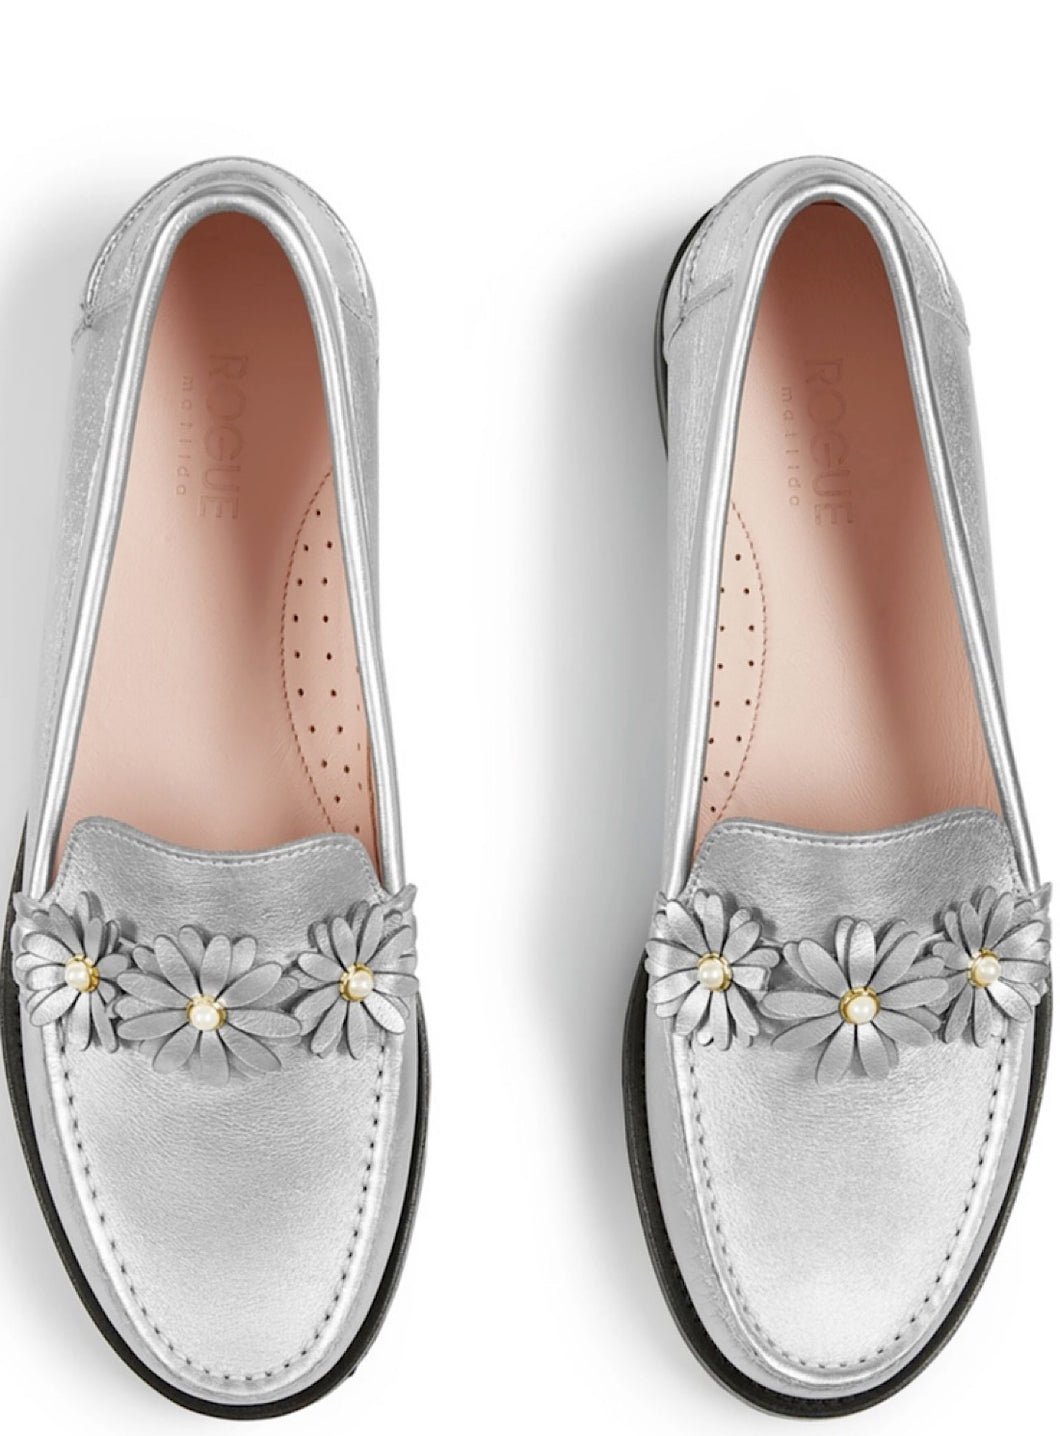 Ditsy Leather Loafer in Silver by Rogue Matilda - shopcurious